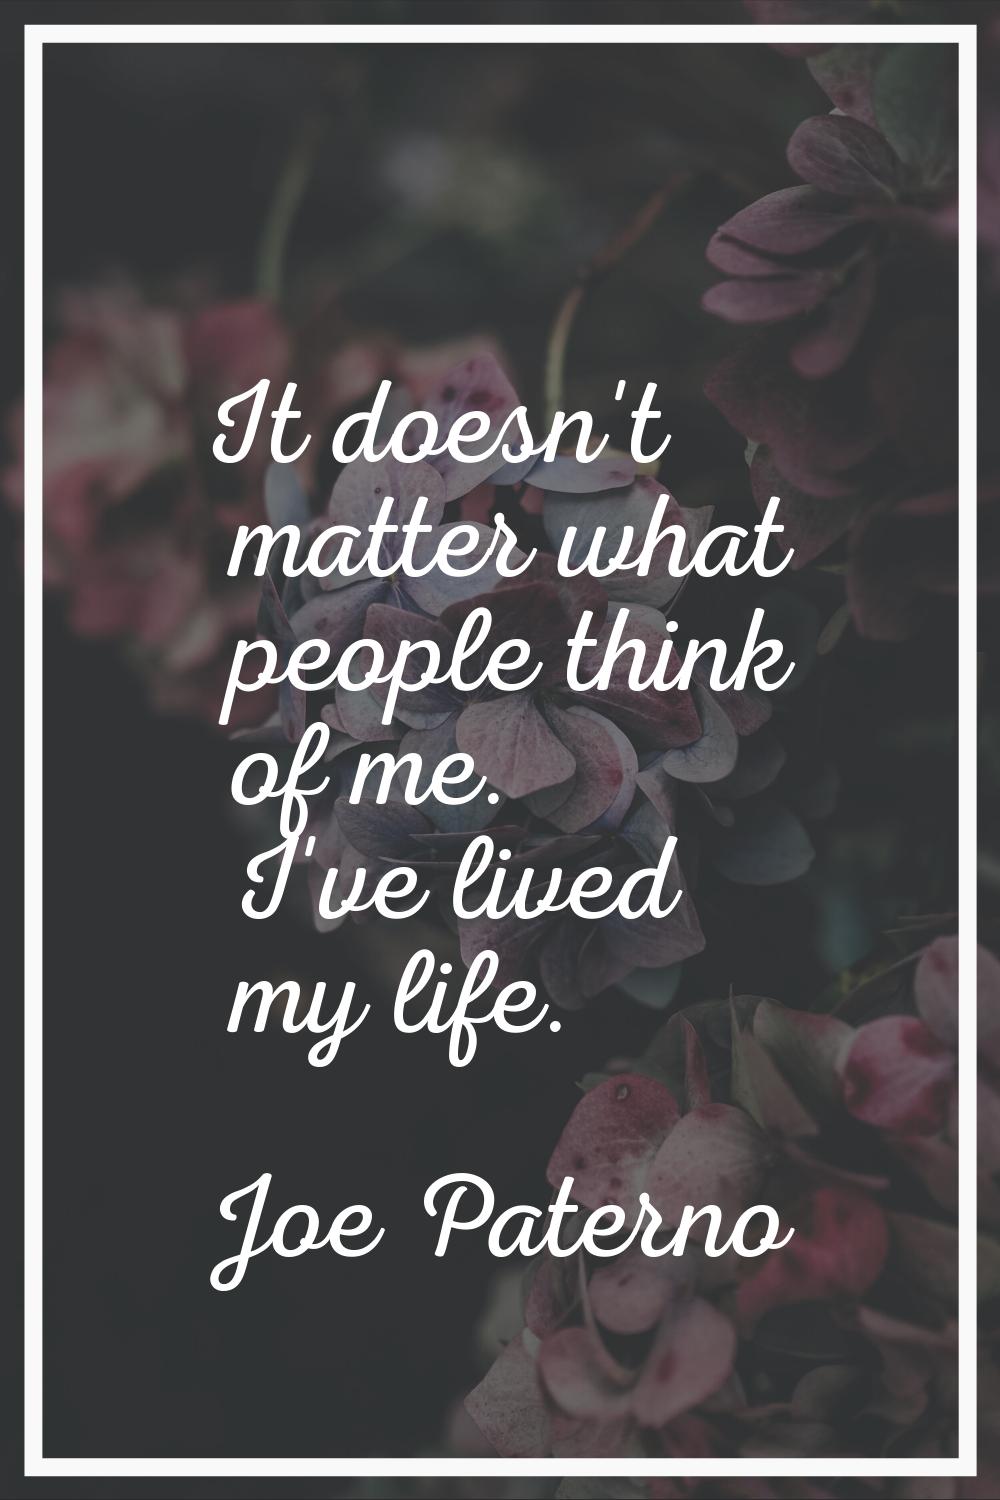 It doesn't matter what people think of me. I've lived my life.